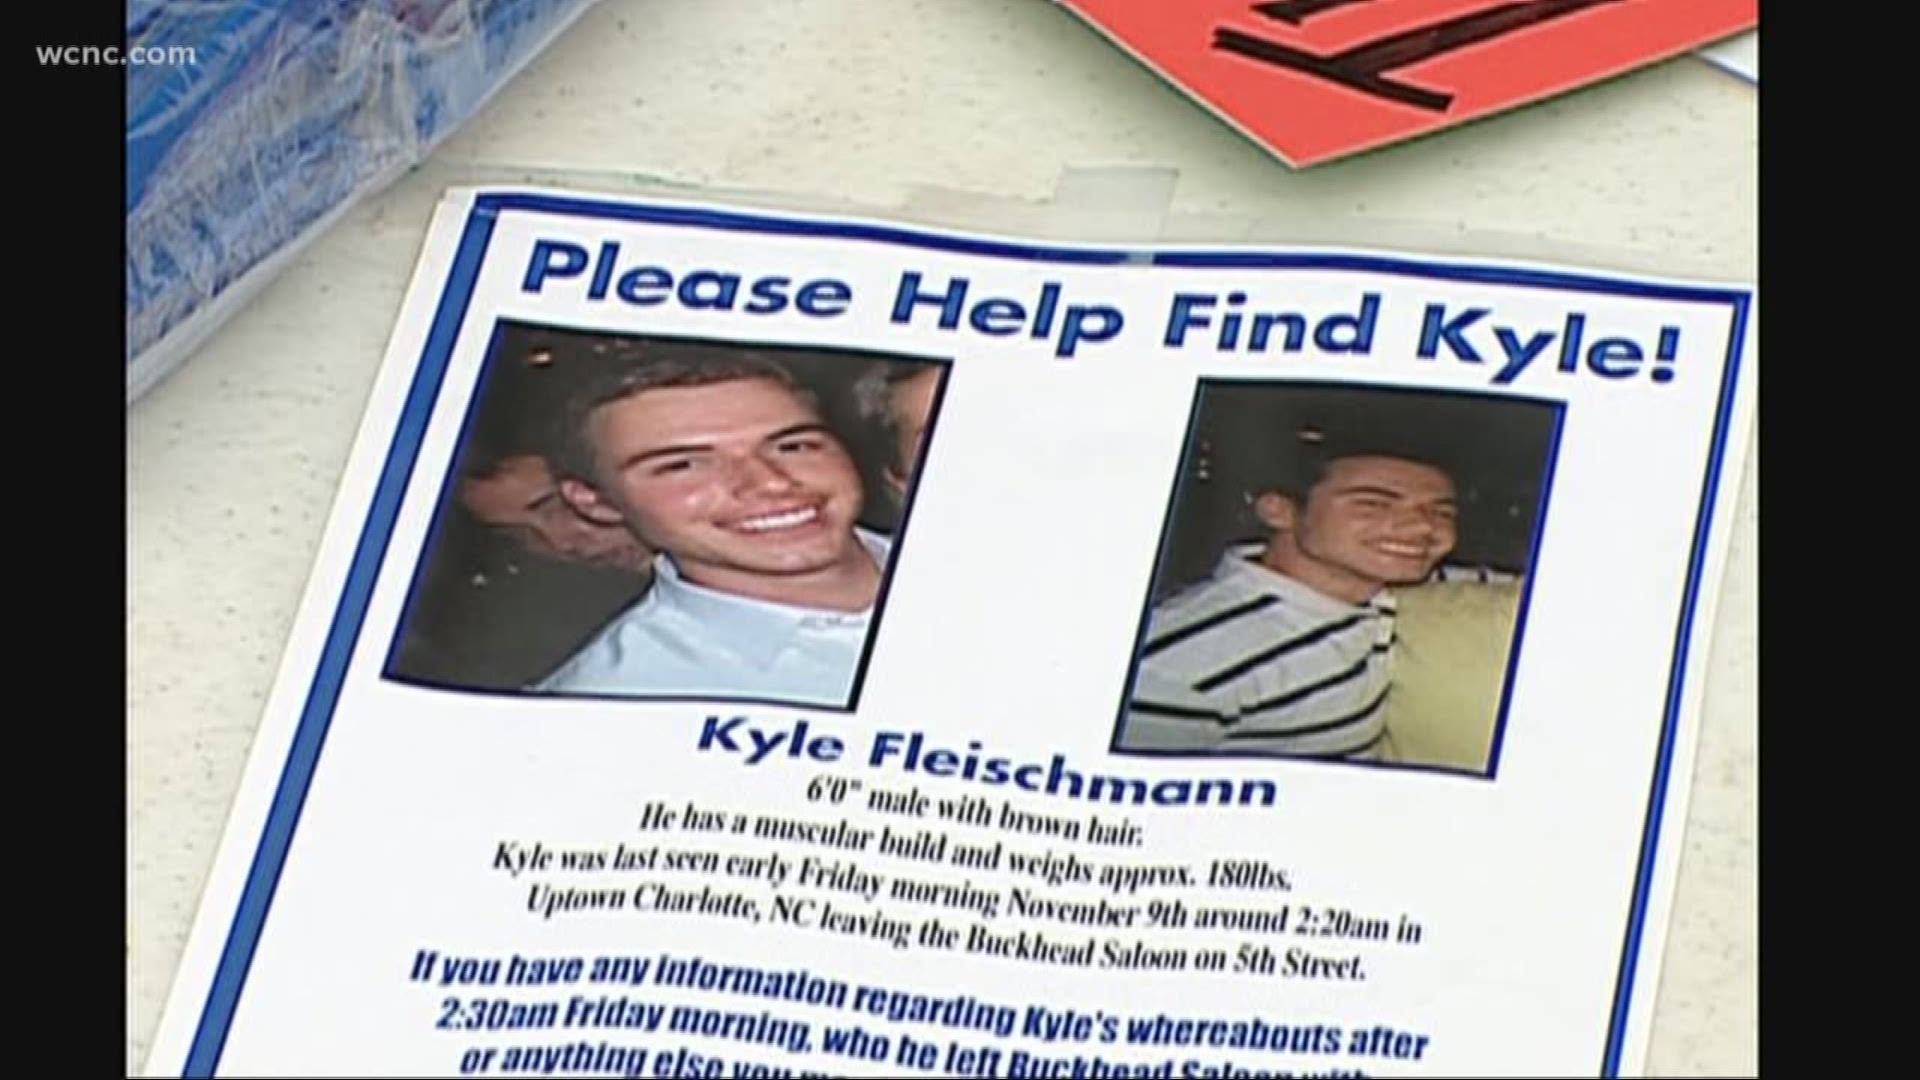 A decade later and still no answers. We're hearing from the father of the man who mysteriously disappeared without a trace. Now, his family is making a desperate plea for information on Kyle Fleischmann. 